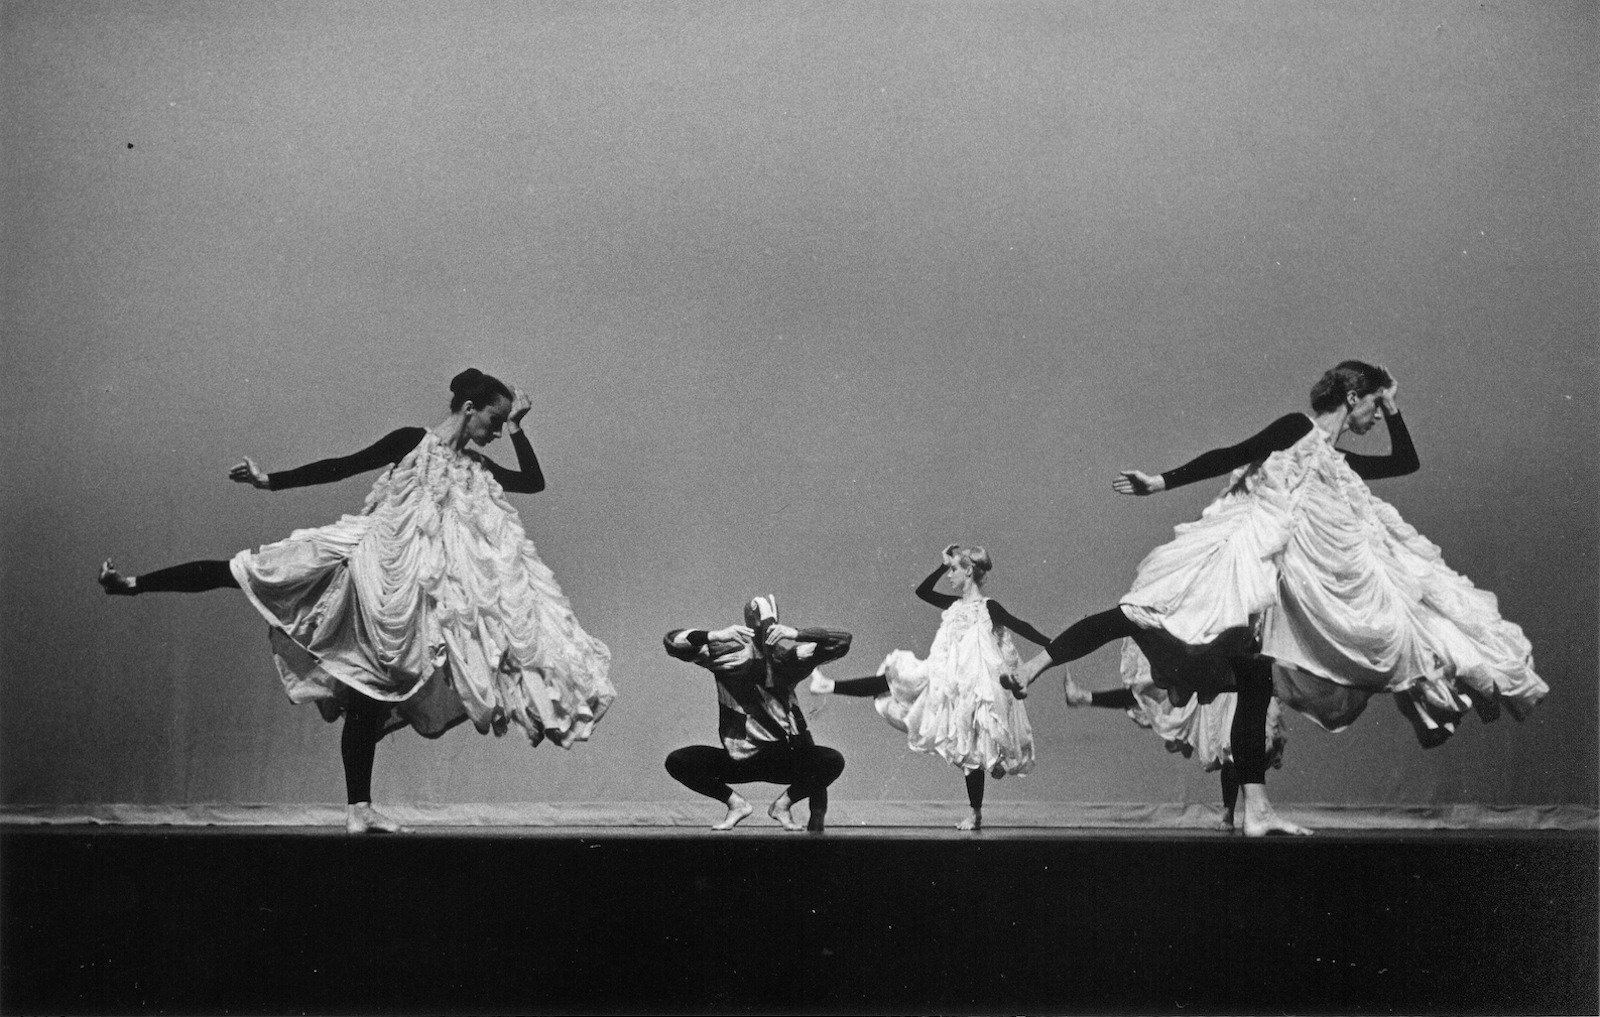 A black-and-white photo of five dancers onstage, two in the foreground with billowy costumes